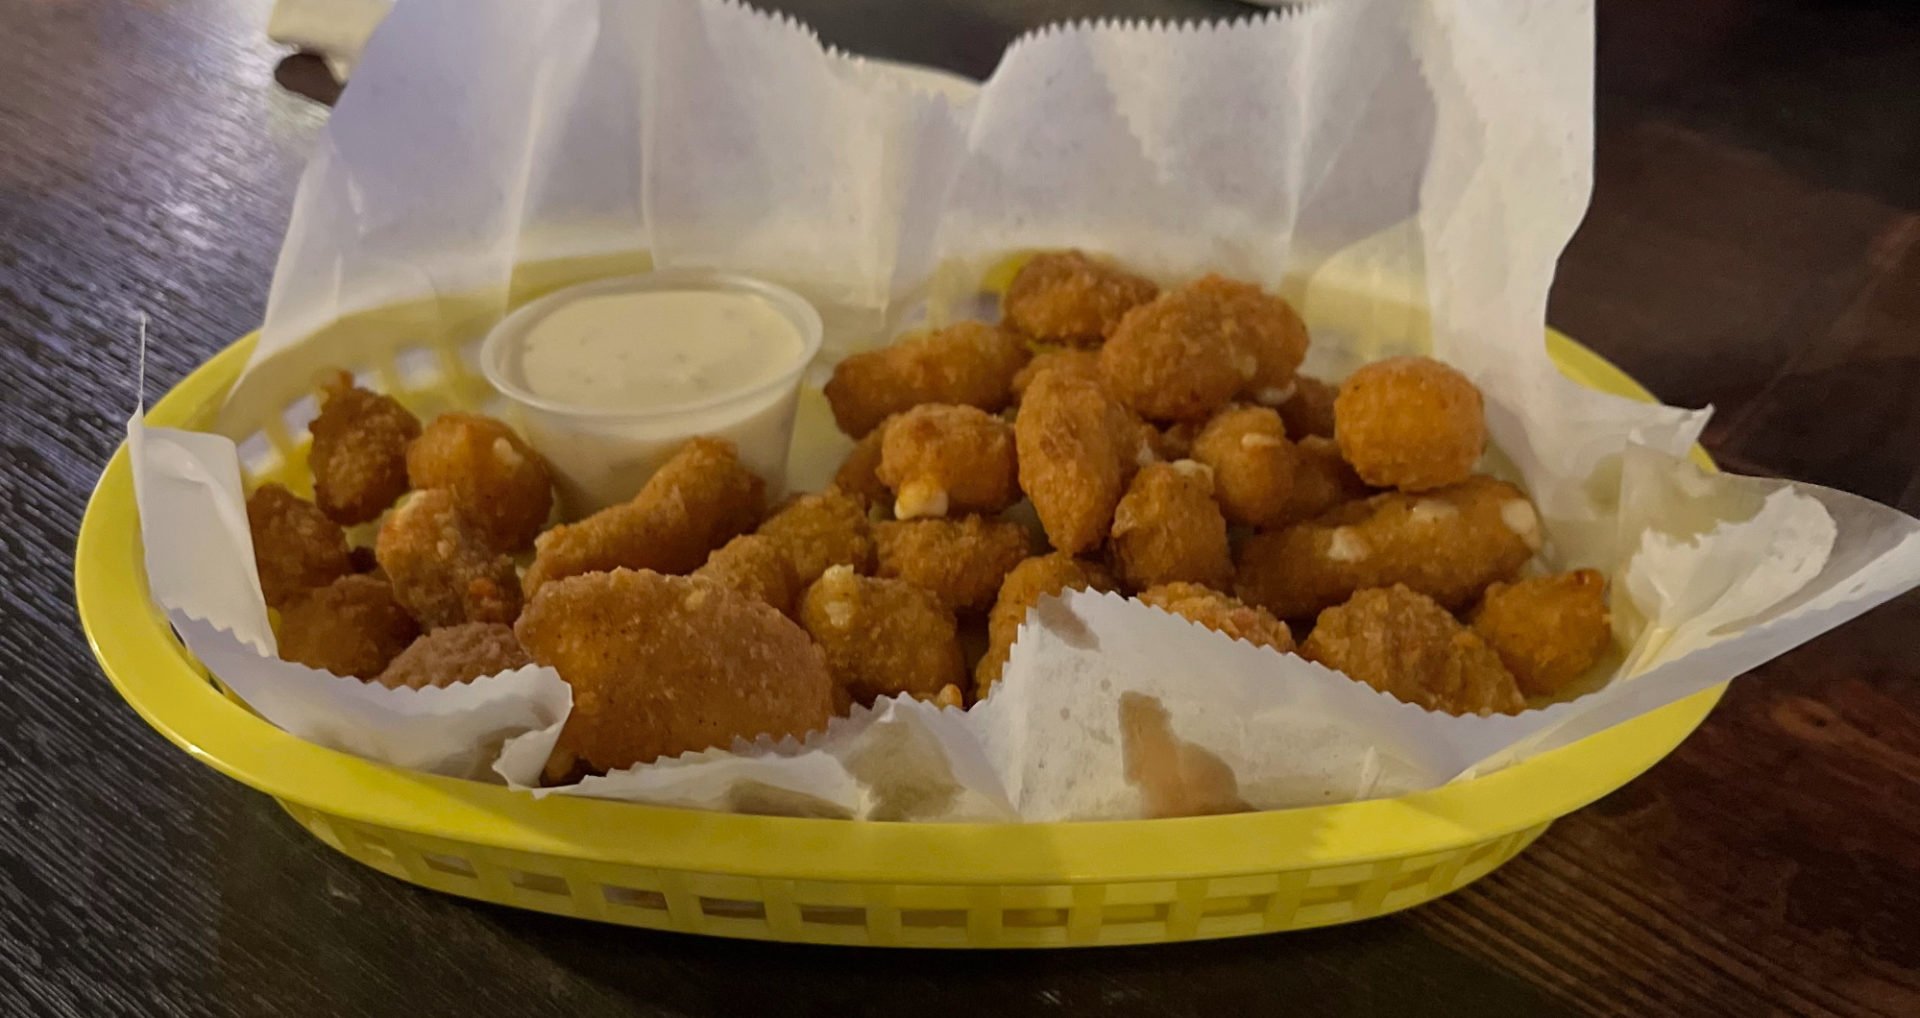 Philo Tavern cheese curds in a yellow basket.